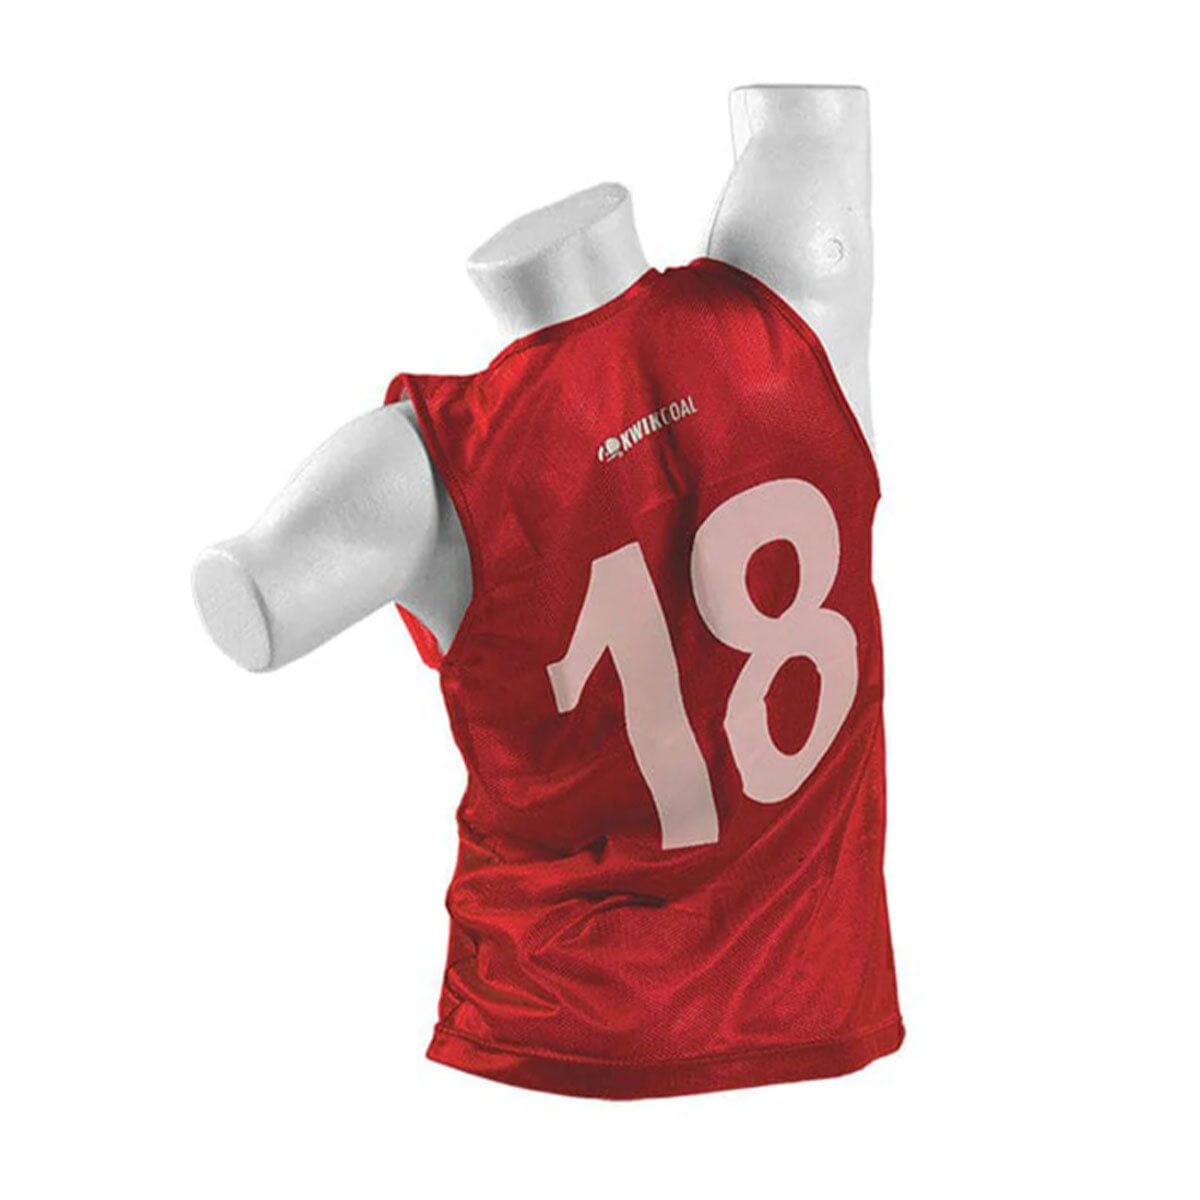 Kwikgoal Numbered Vests 1-18 | 19A9 Training equipment Kwikgoal Adult Red 